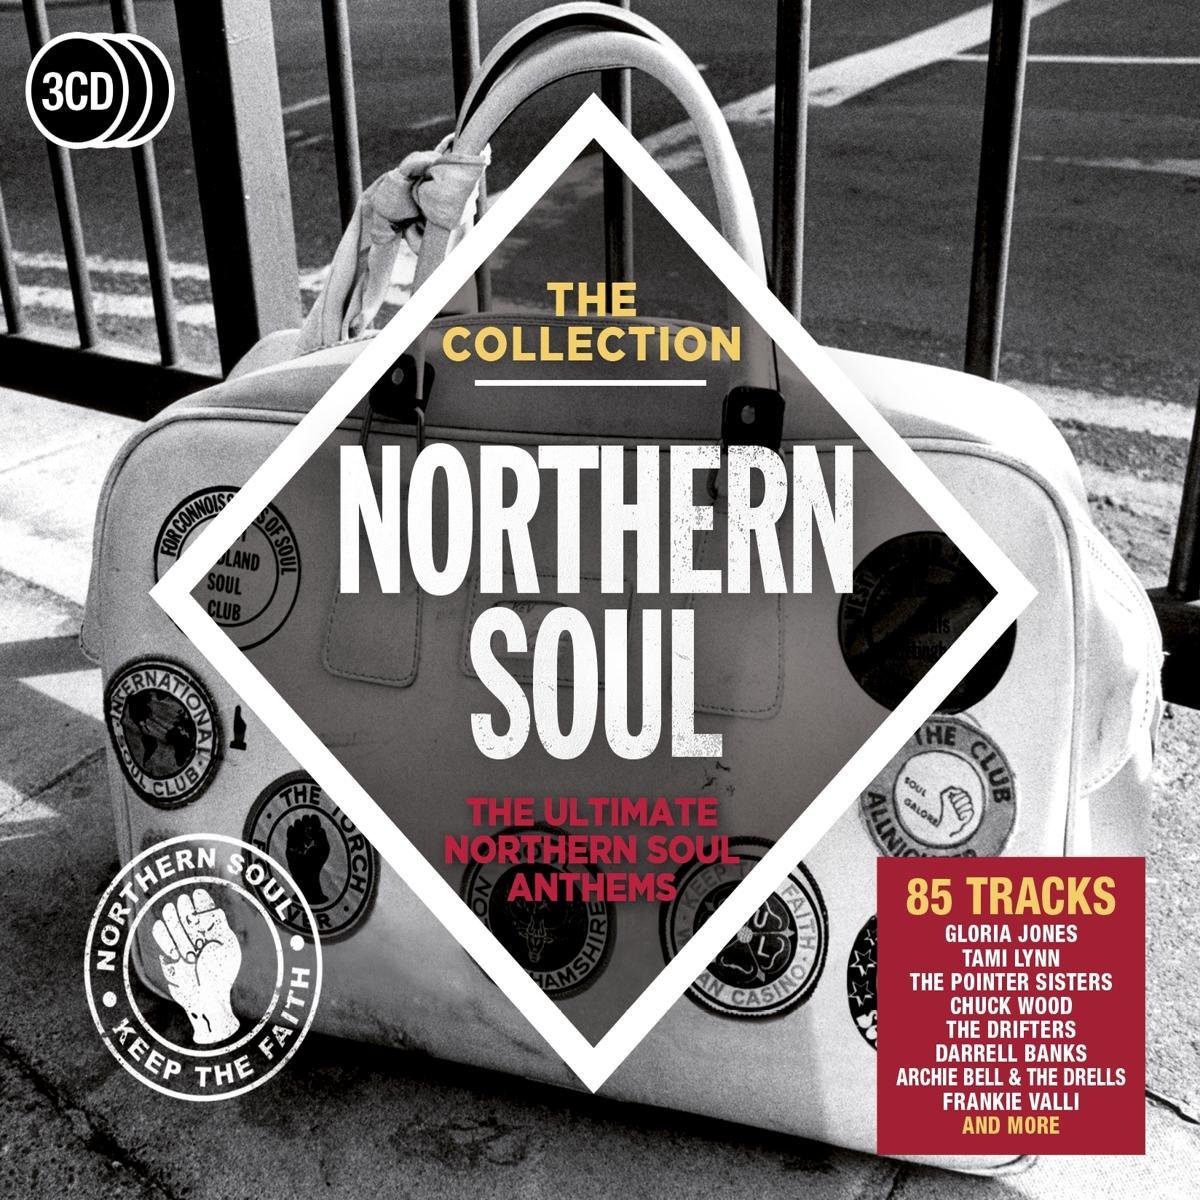 Northern Soul - The Collection - various artists